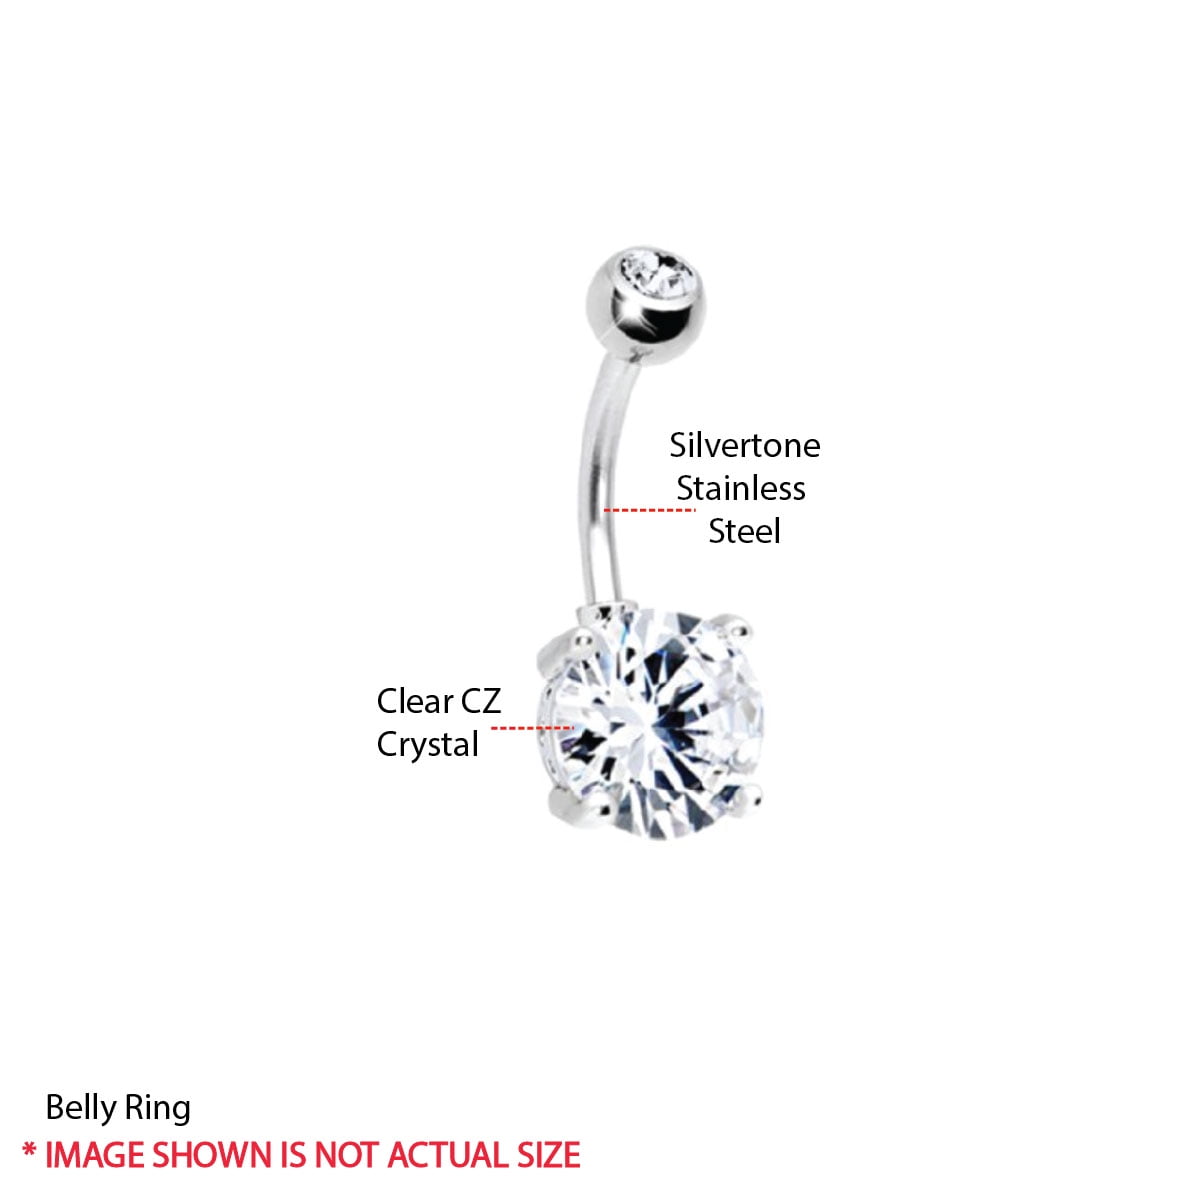 NEW HOCKEY PLAYER ACTIVE SPORTS FAN CHARM ON 14g CLEAR CZ BELLY RING BARBELL